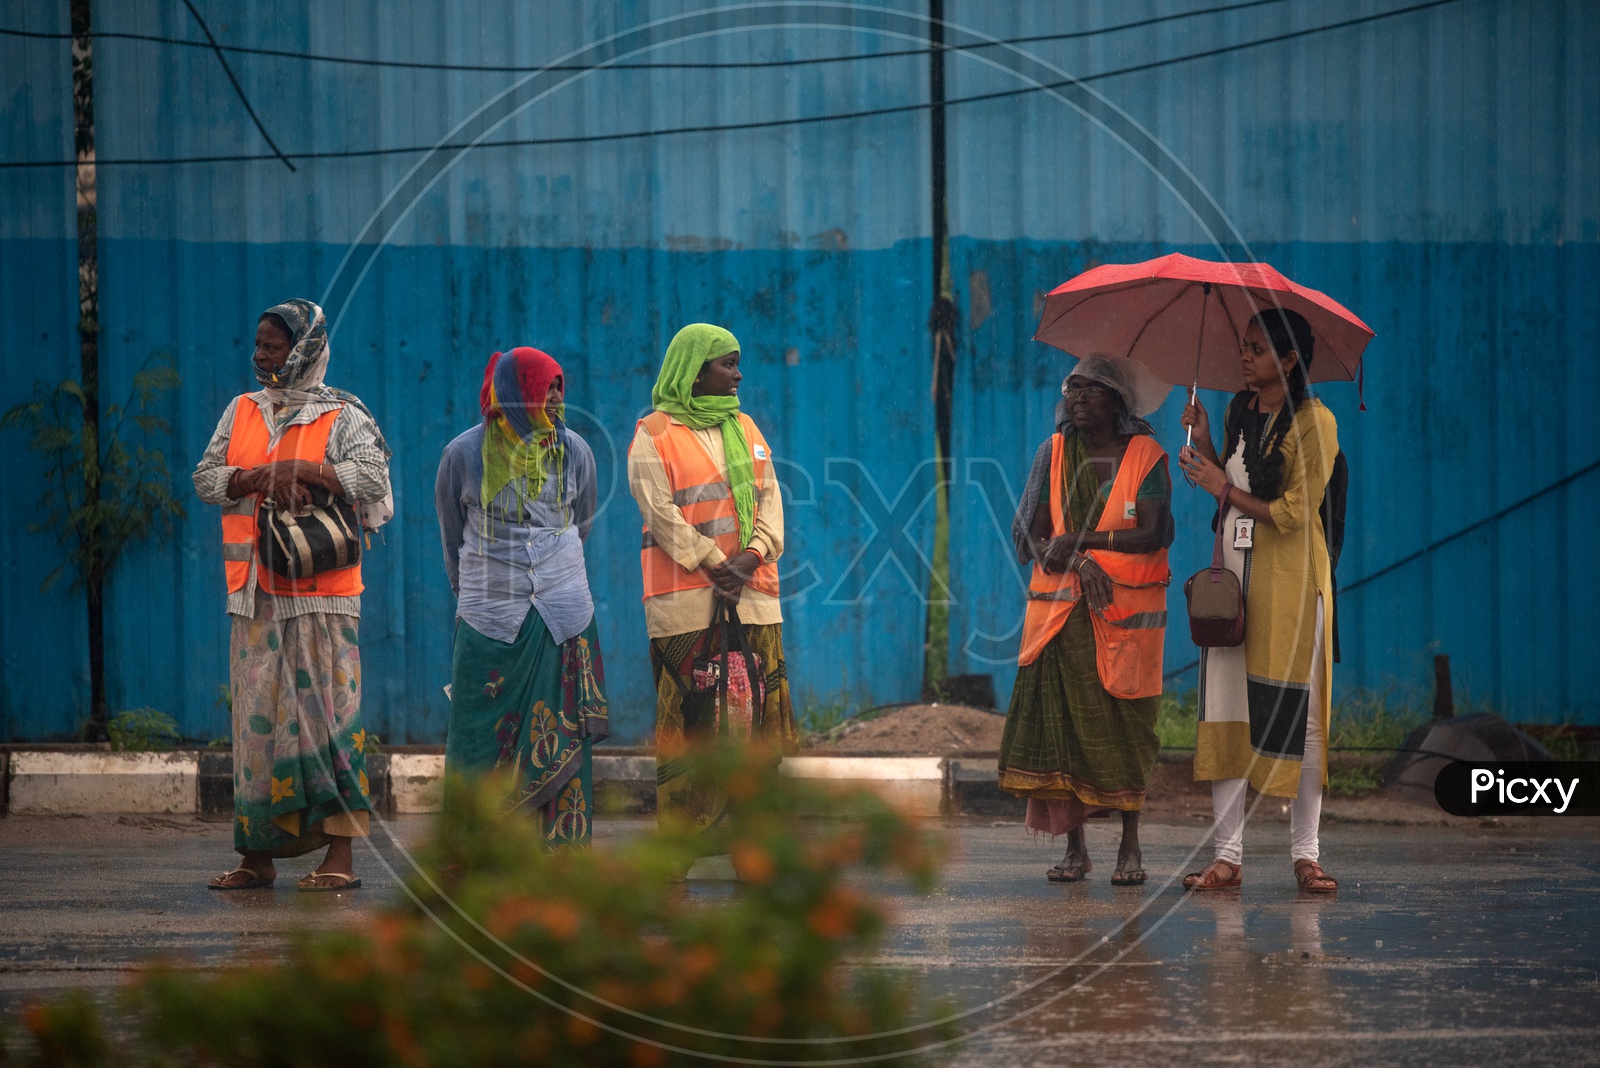 Women waiting for a Bus while raining